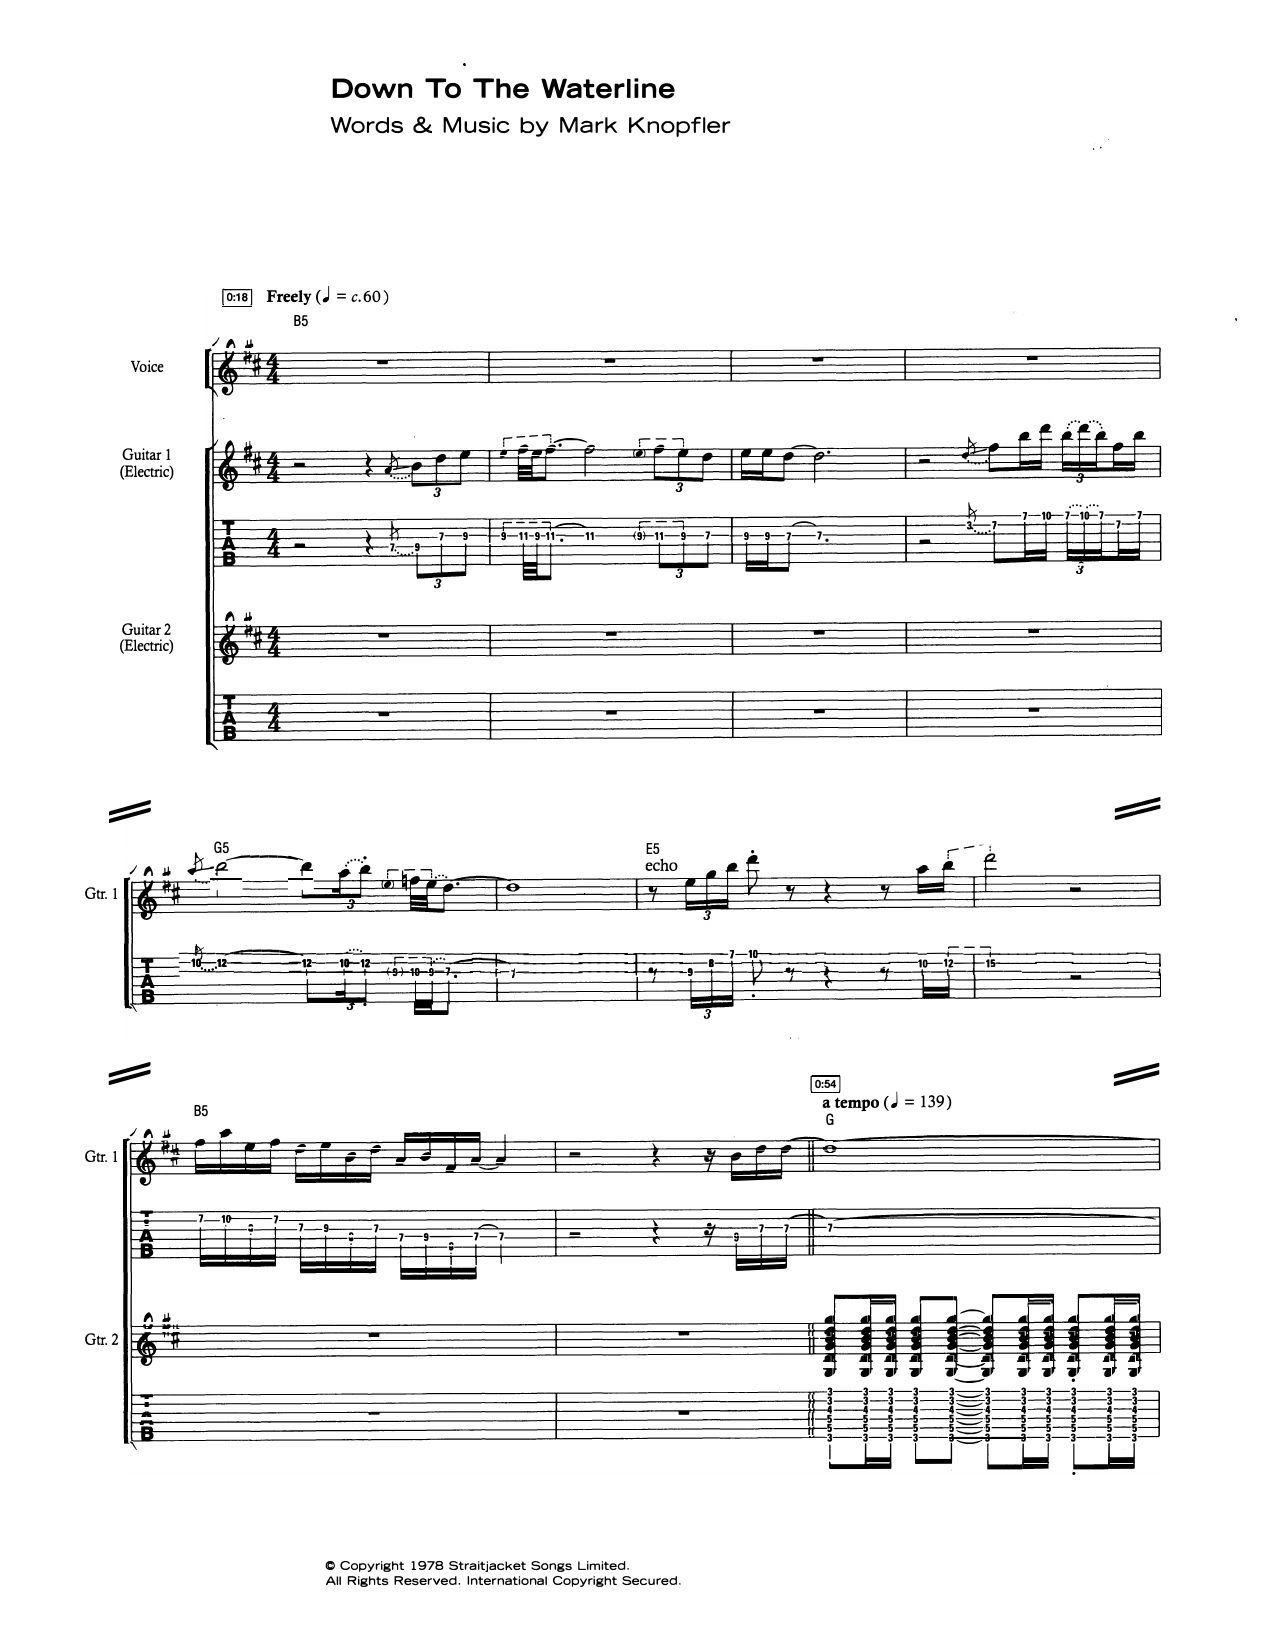 Download Dire Straits Down To The Waterline Sheet Music